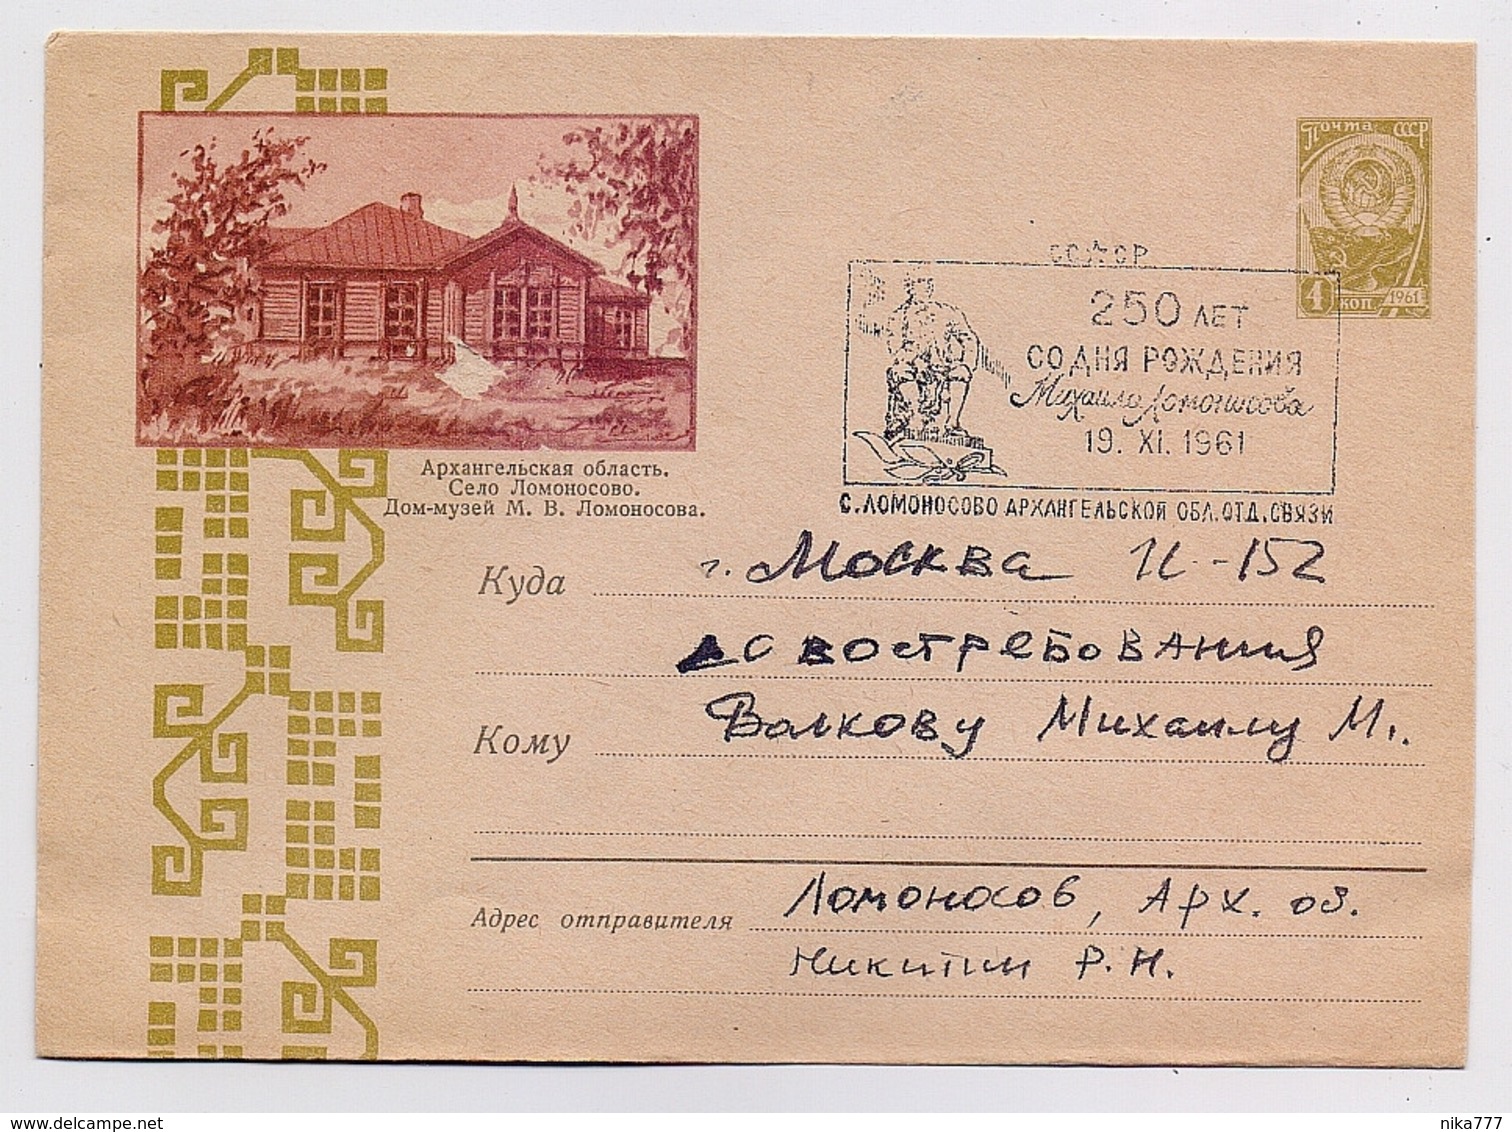 Stationery 1961 Mail Cover Used USSR RUSSIA Chemist Lomonosov Physicist Arkhangelsk - 1960-69